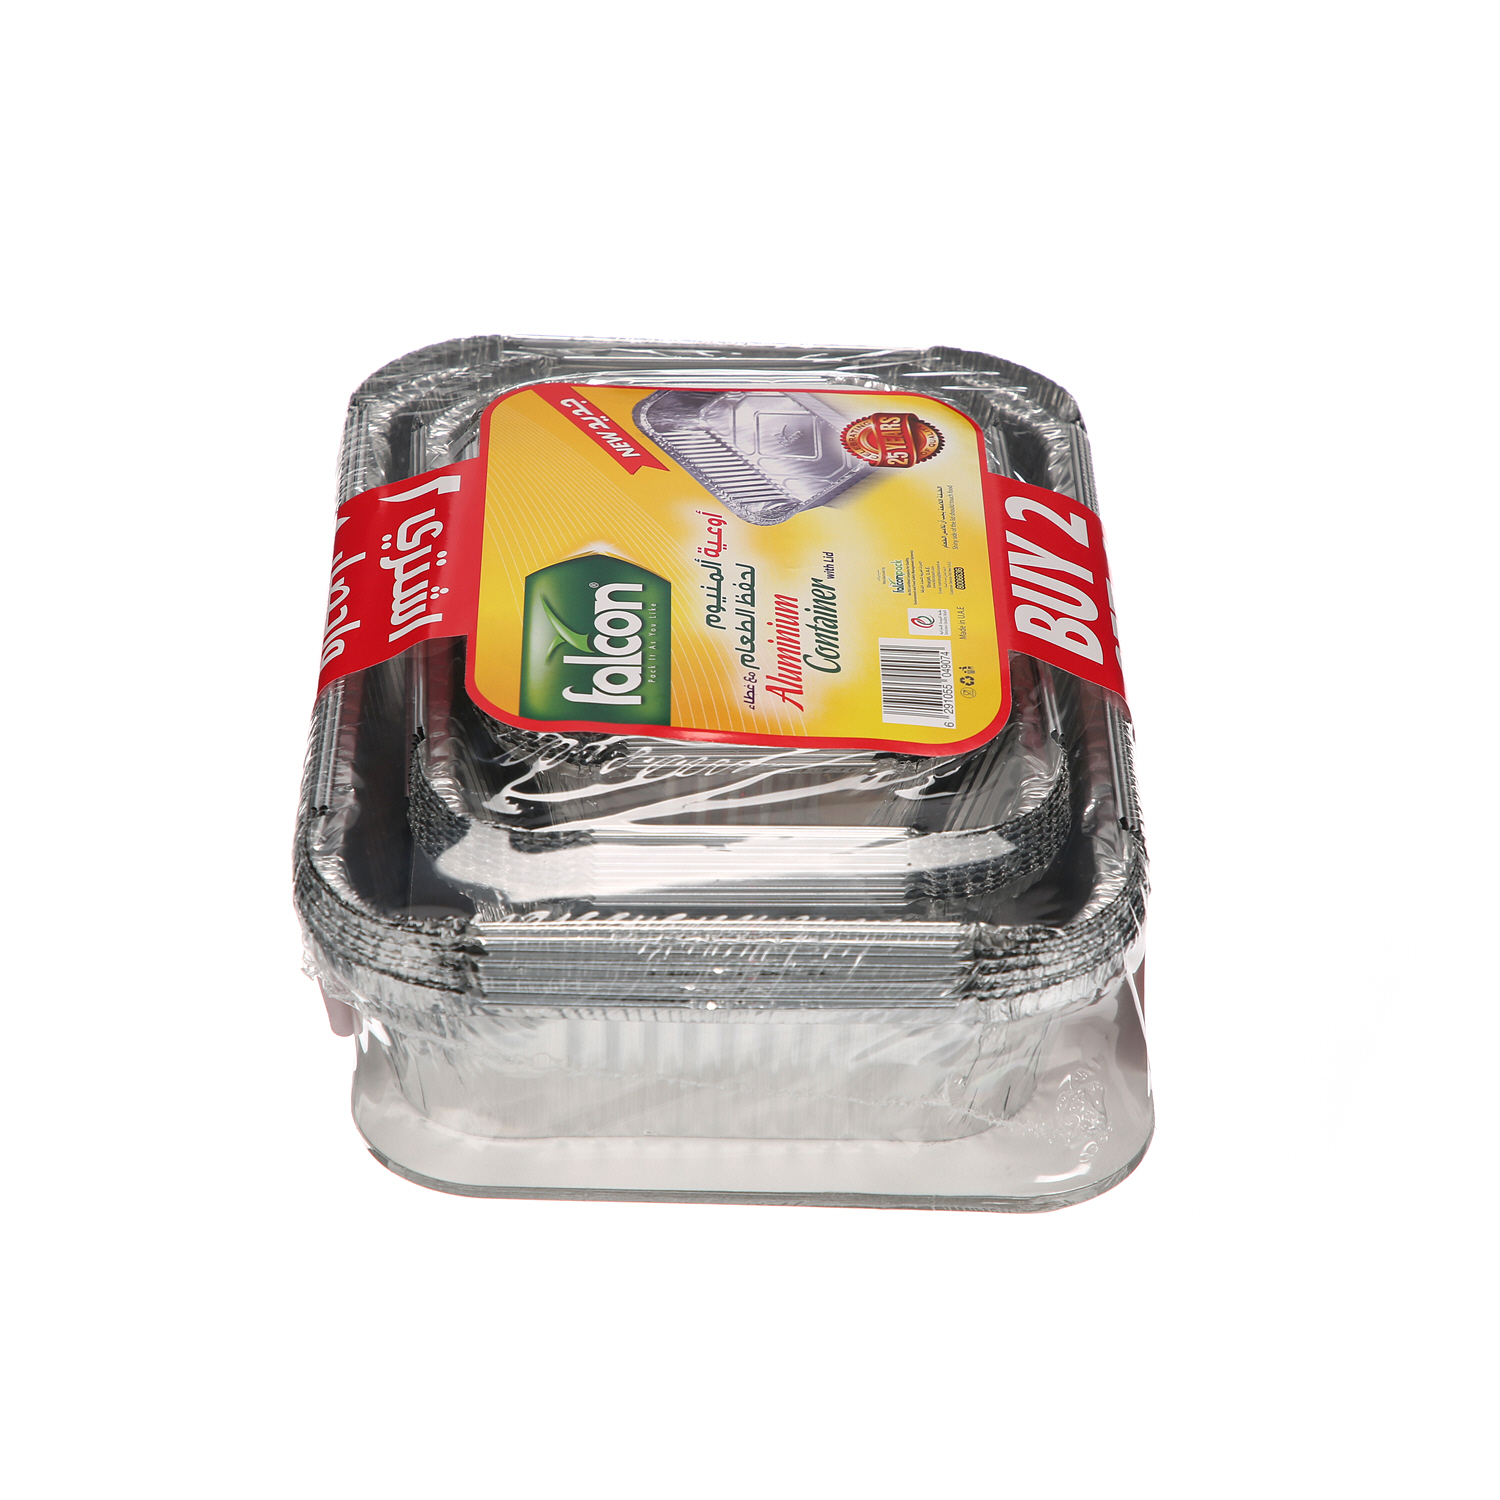 Falcon Aluminum Container with Lid 30 Pack